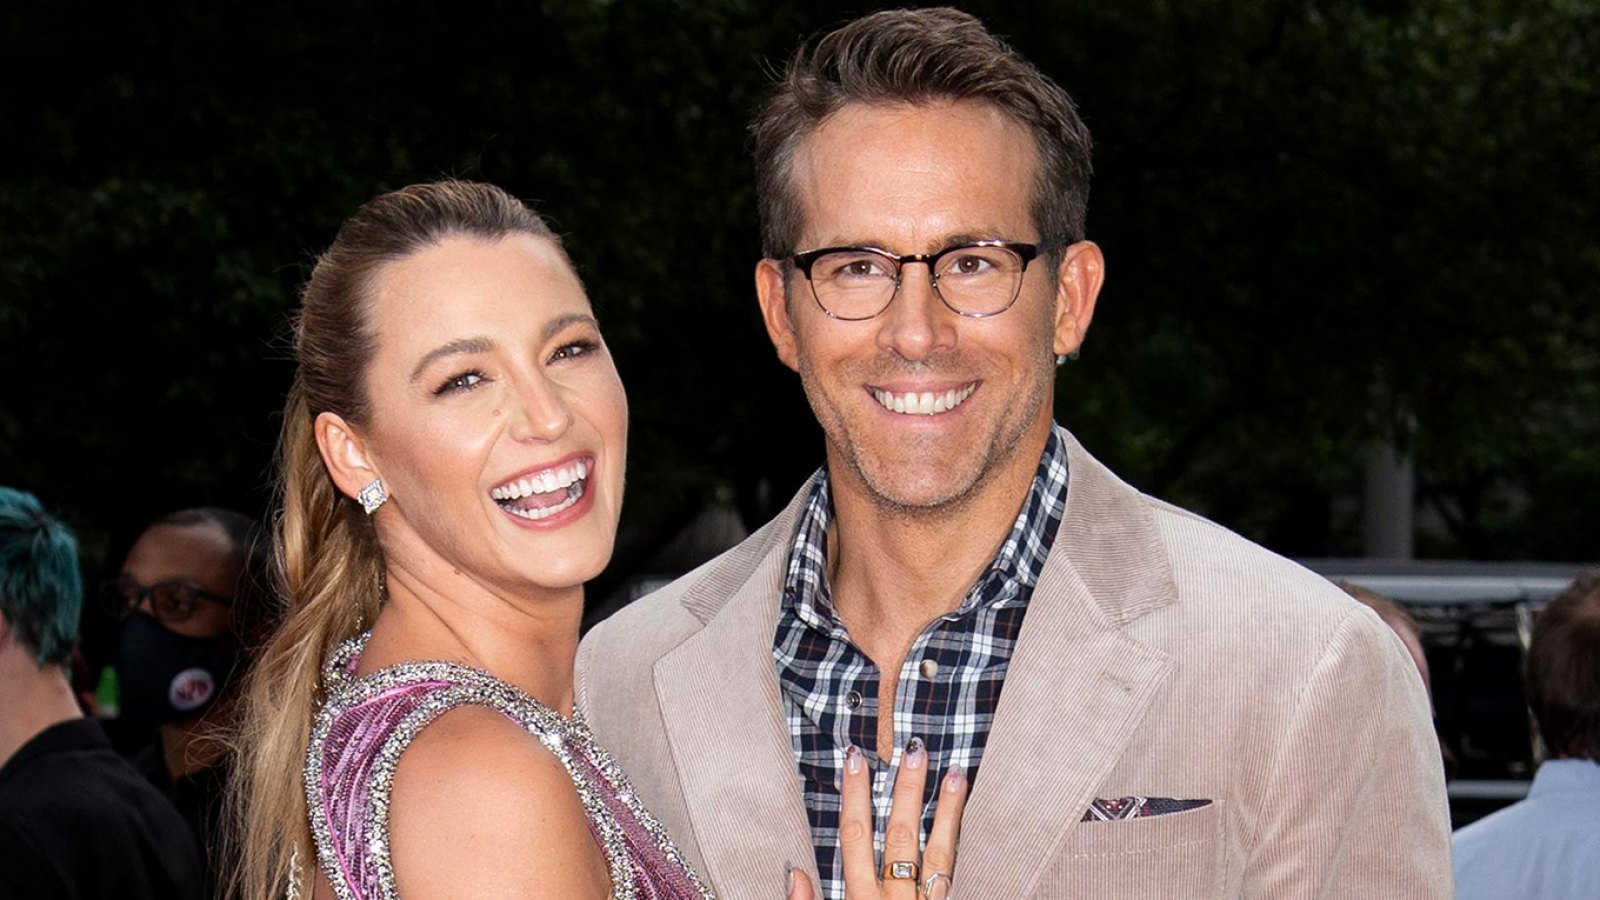 https://www.usmagazine.com/wp-content/uploads/2021/10/Ryan-Reynolds-Explains-His-Sabbatical-Will-Benefit-His-Daughters-With-Blake-Lively-Feature.jpg?crop=0px%2C43px%2C1360px%2C768px&resize=1600%2C900&quality=86&strip=all